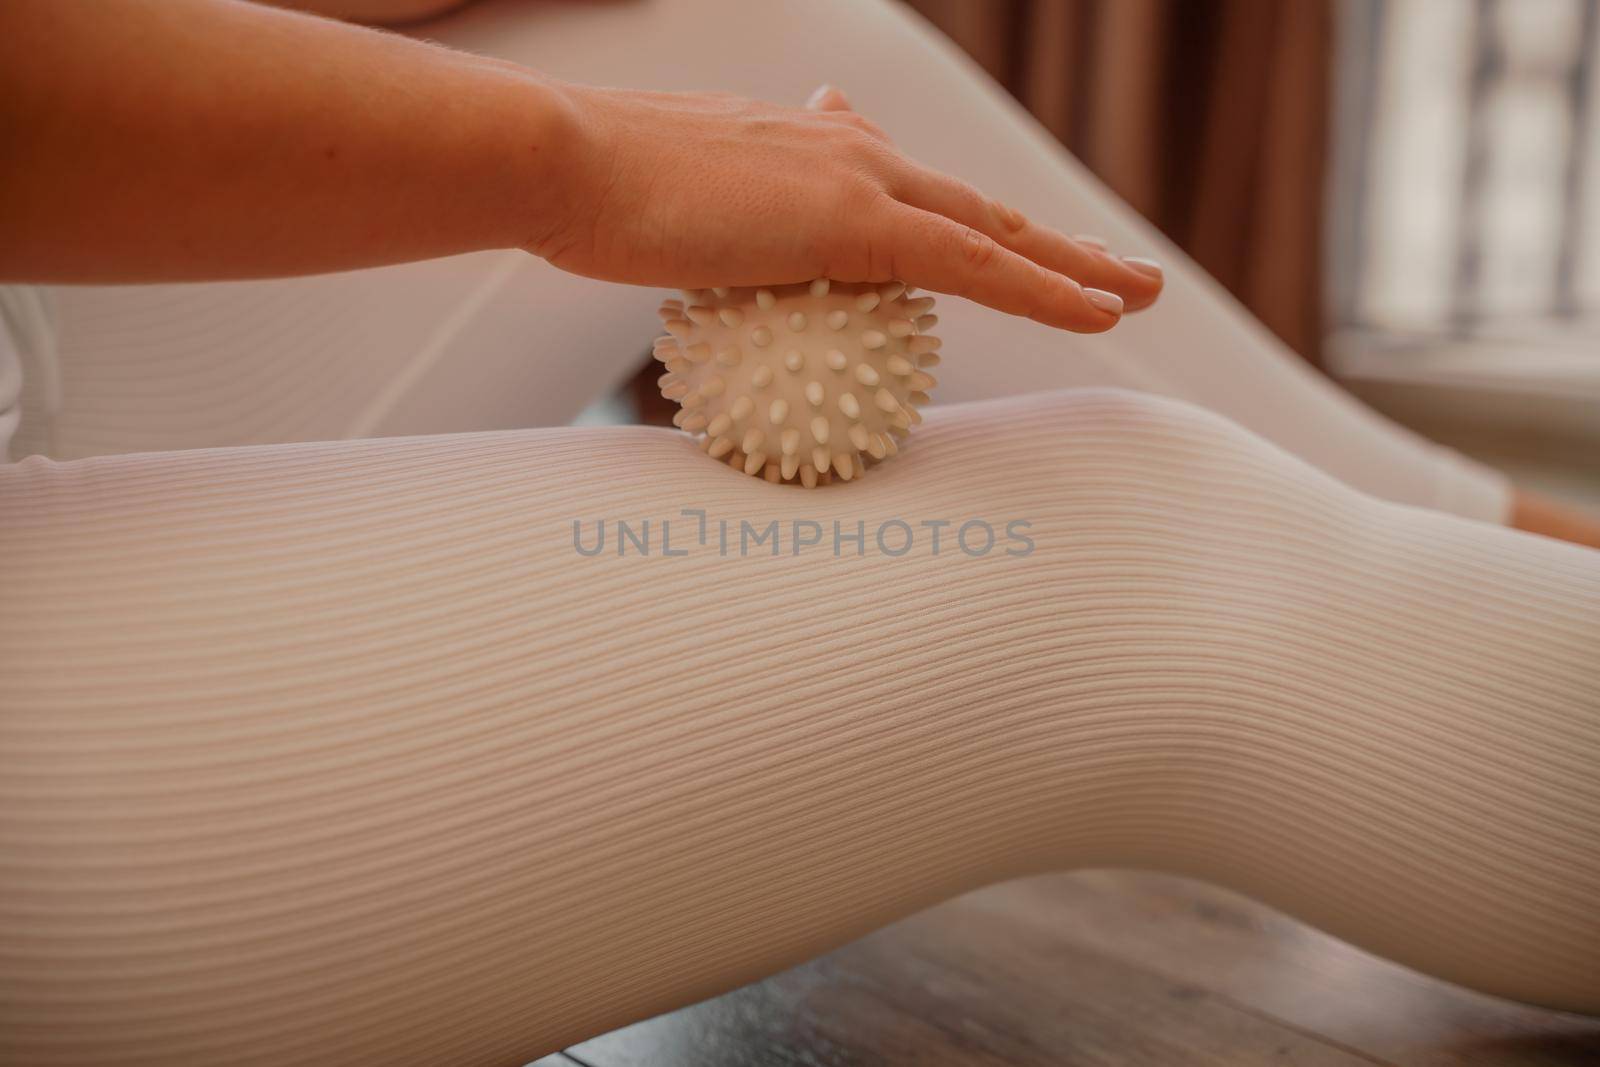 Athletic slim caucasian woman doing thigh self-massage with a massage ball indoors. Self-isolating massage.